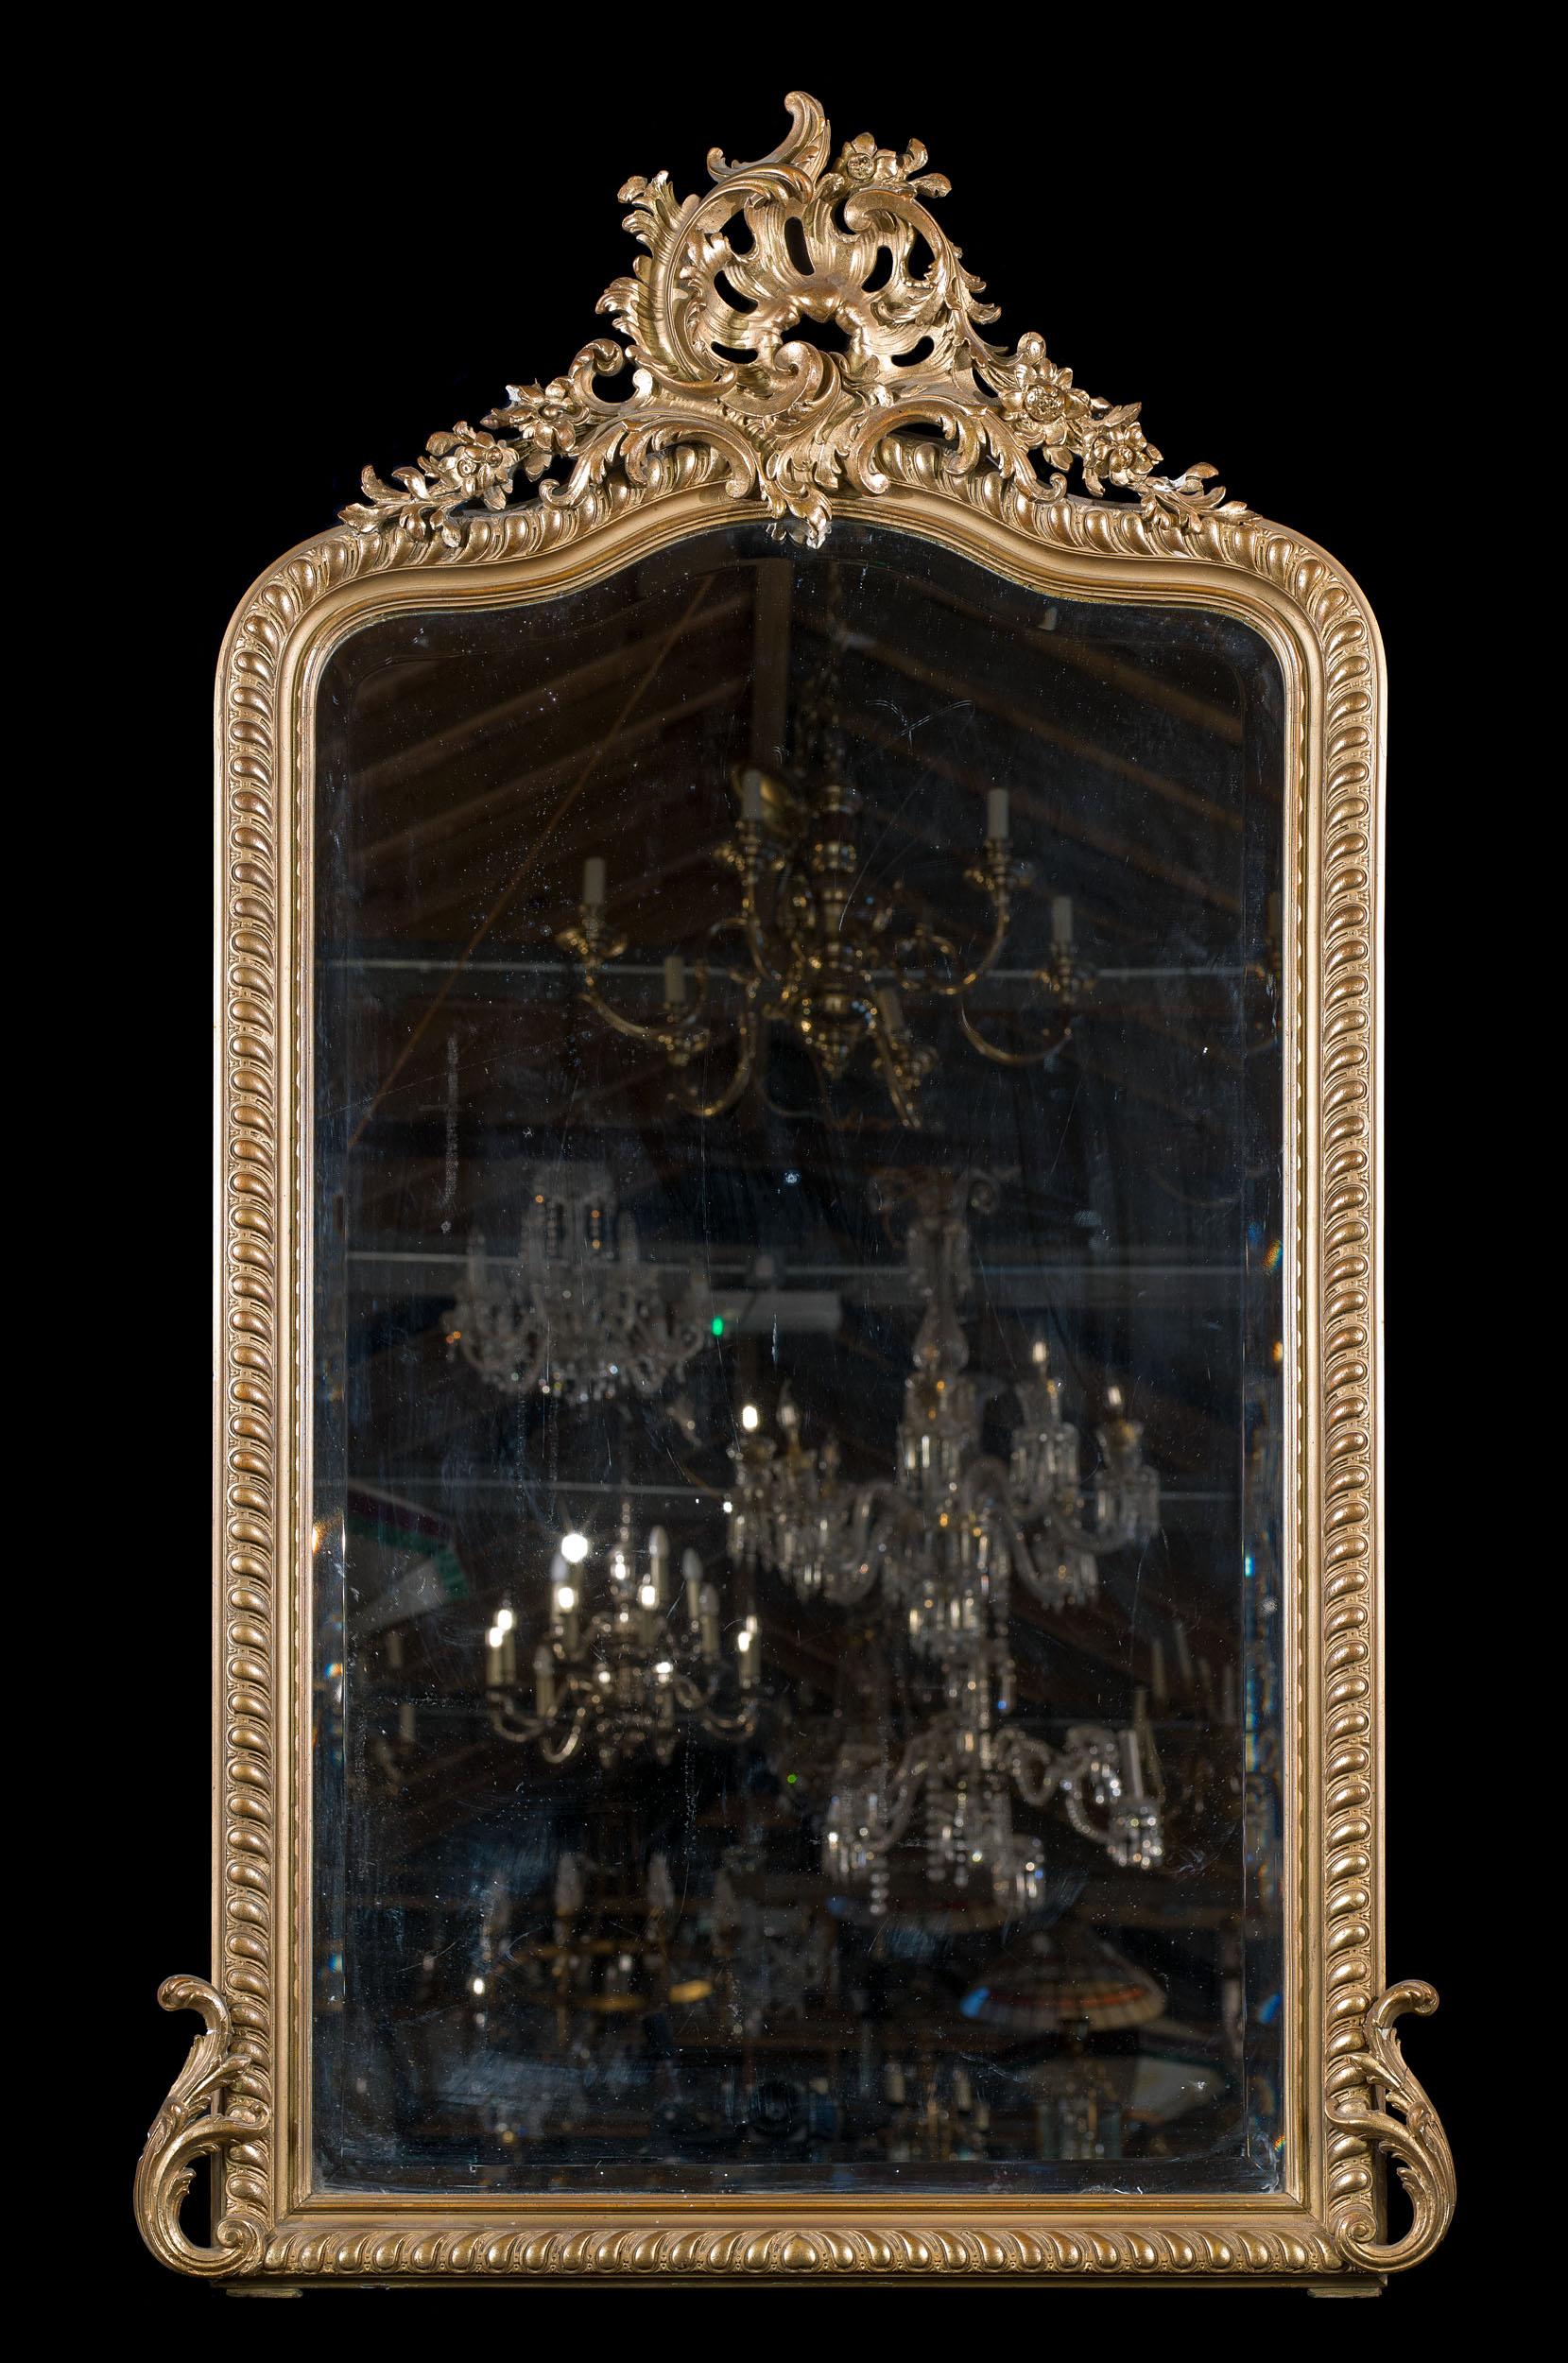 A 19th century Rococo gilt gesso overmantel mirror, surmounted by shell set within foliate c scrolls and trailing flowers. The original bevelled mirror plate sits within a moulded frame.
French, c.1890.